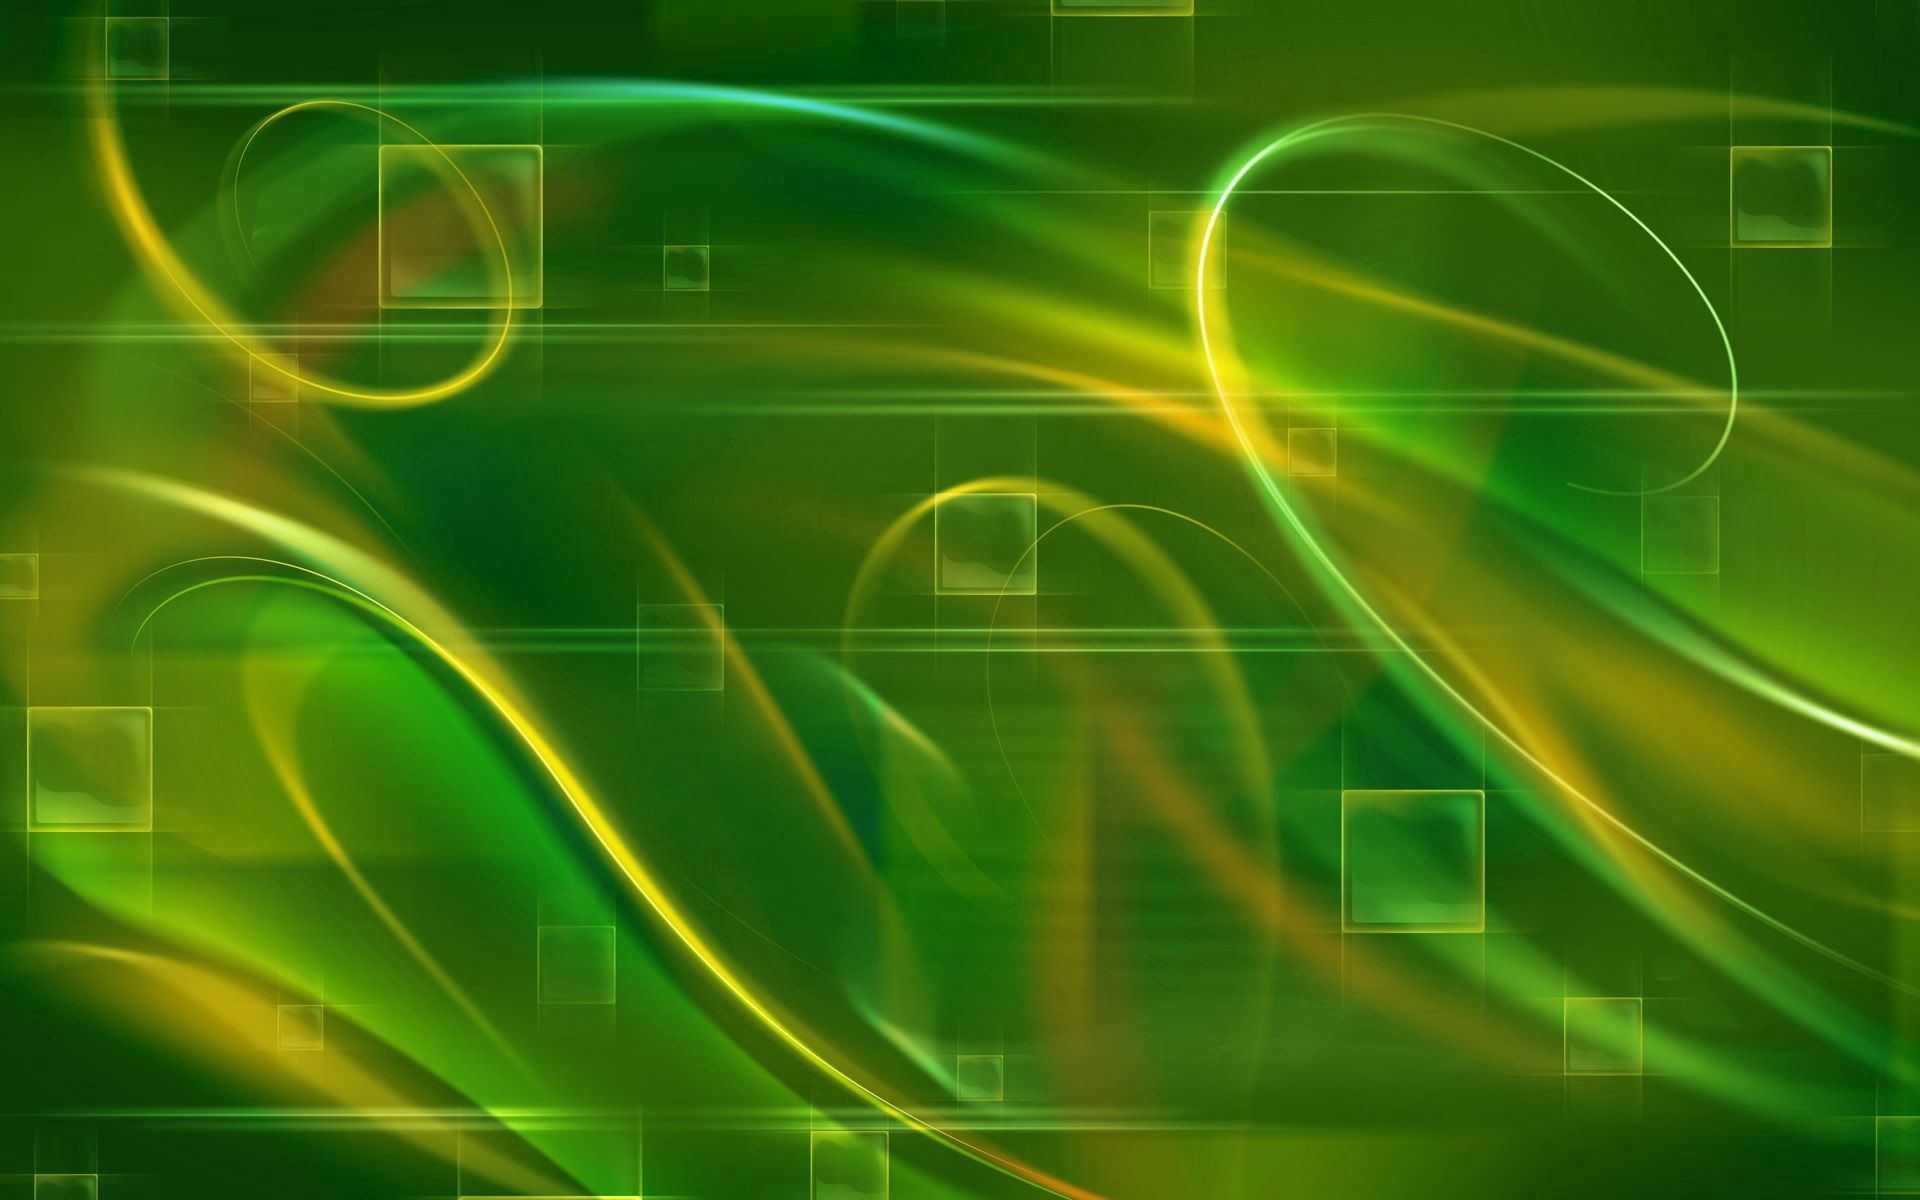 square, wavy, abstract, green, lines, cells